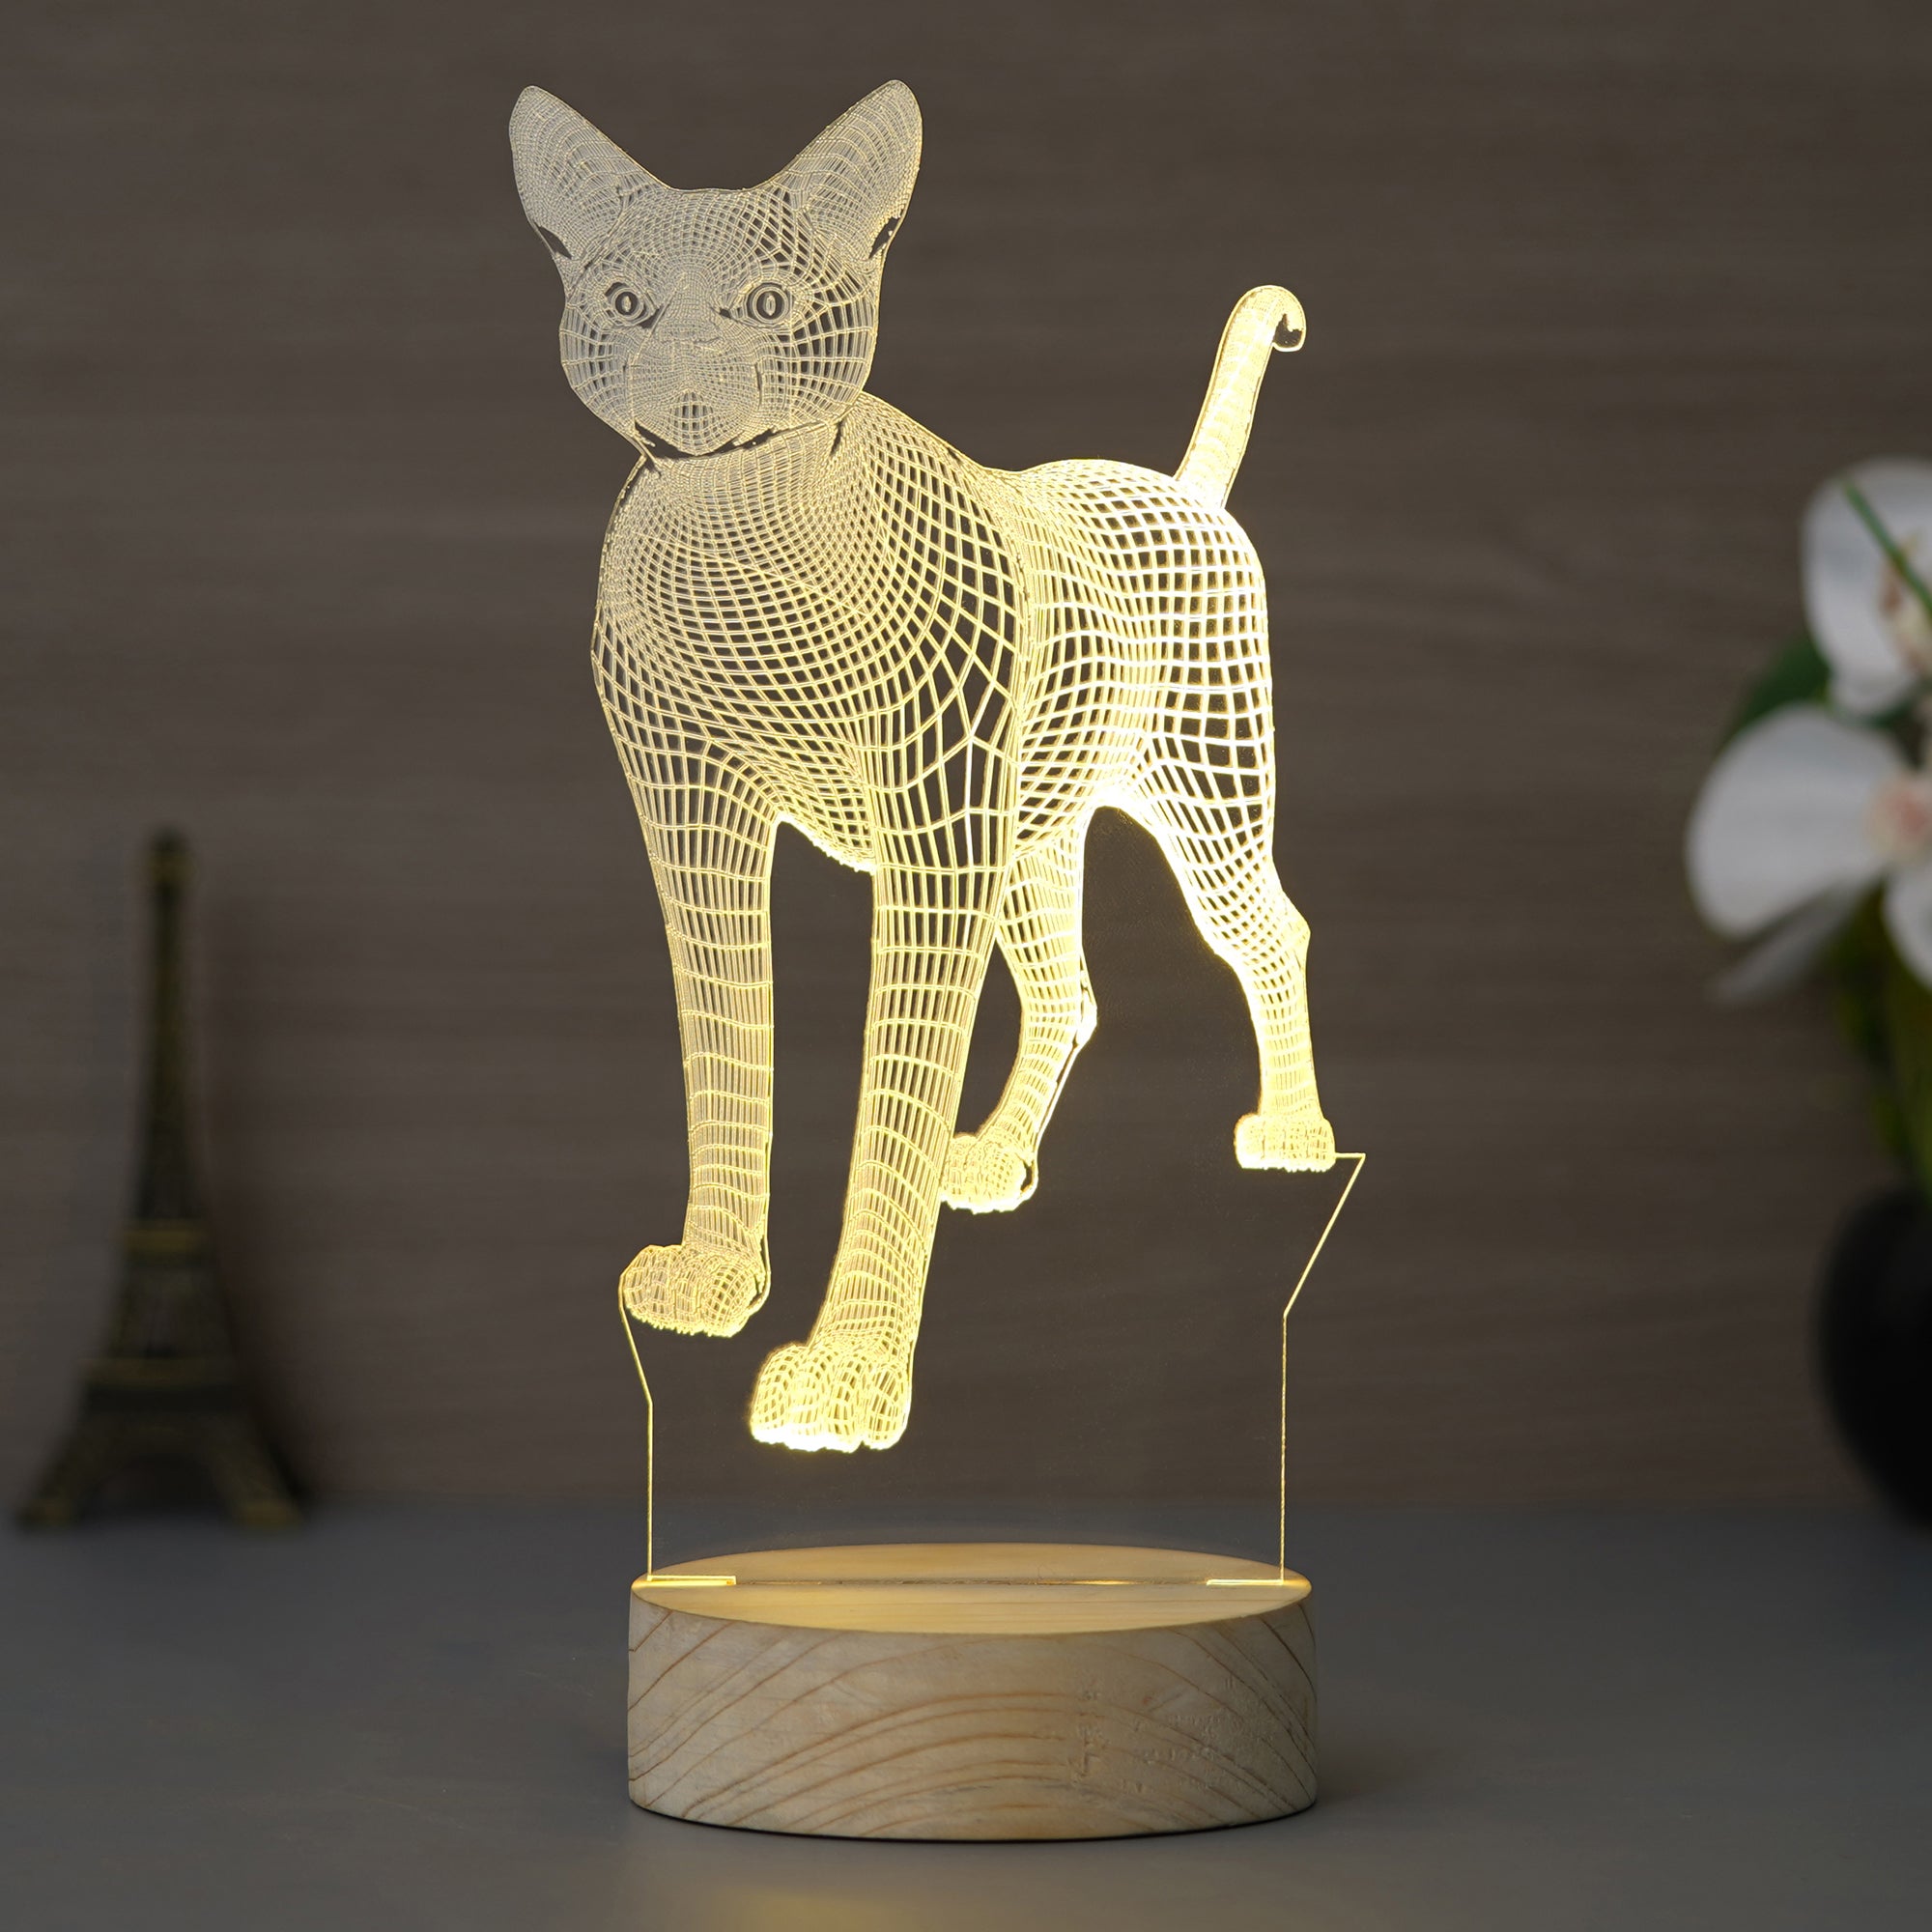 Standing Cat Design Carved on Acrylic & Wood Base Night Lamp